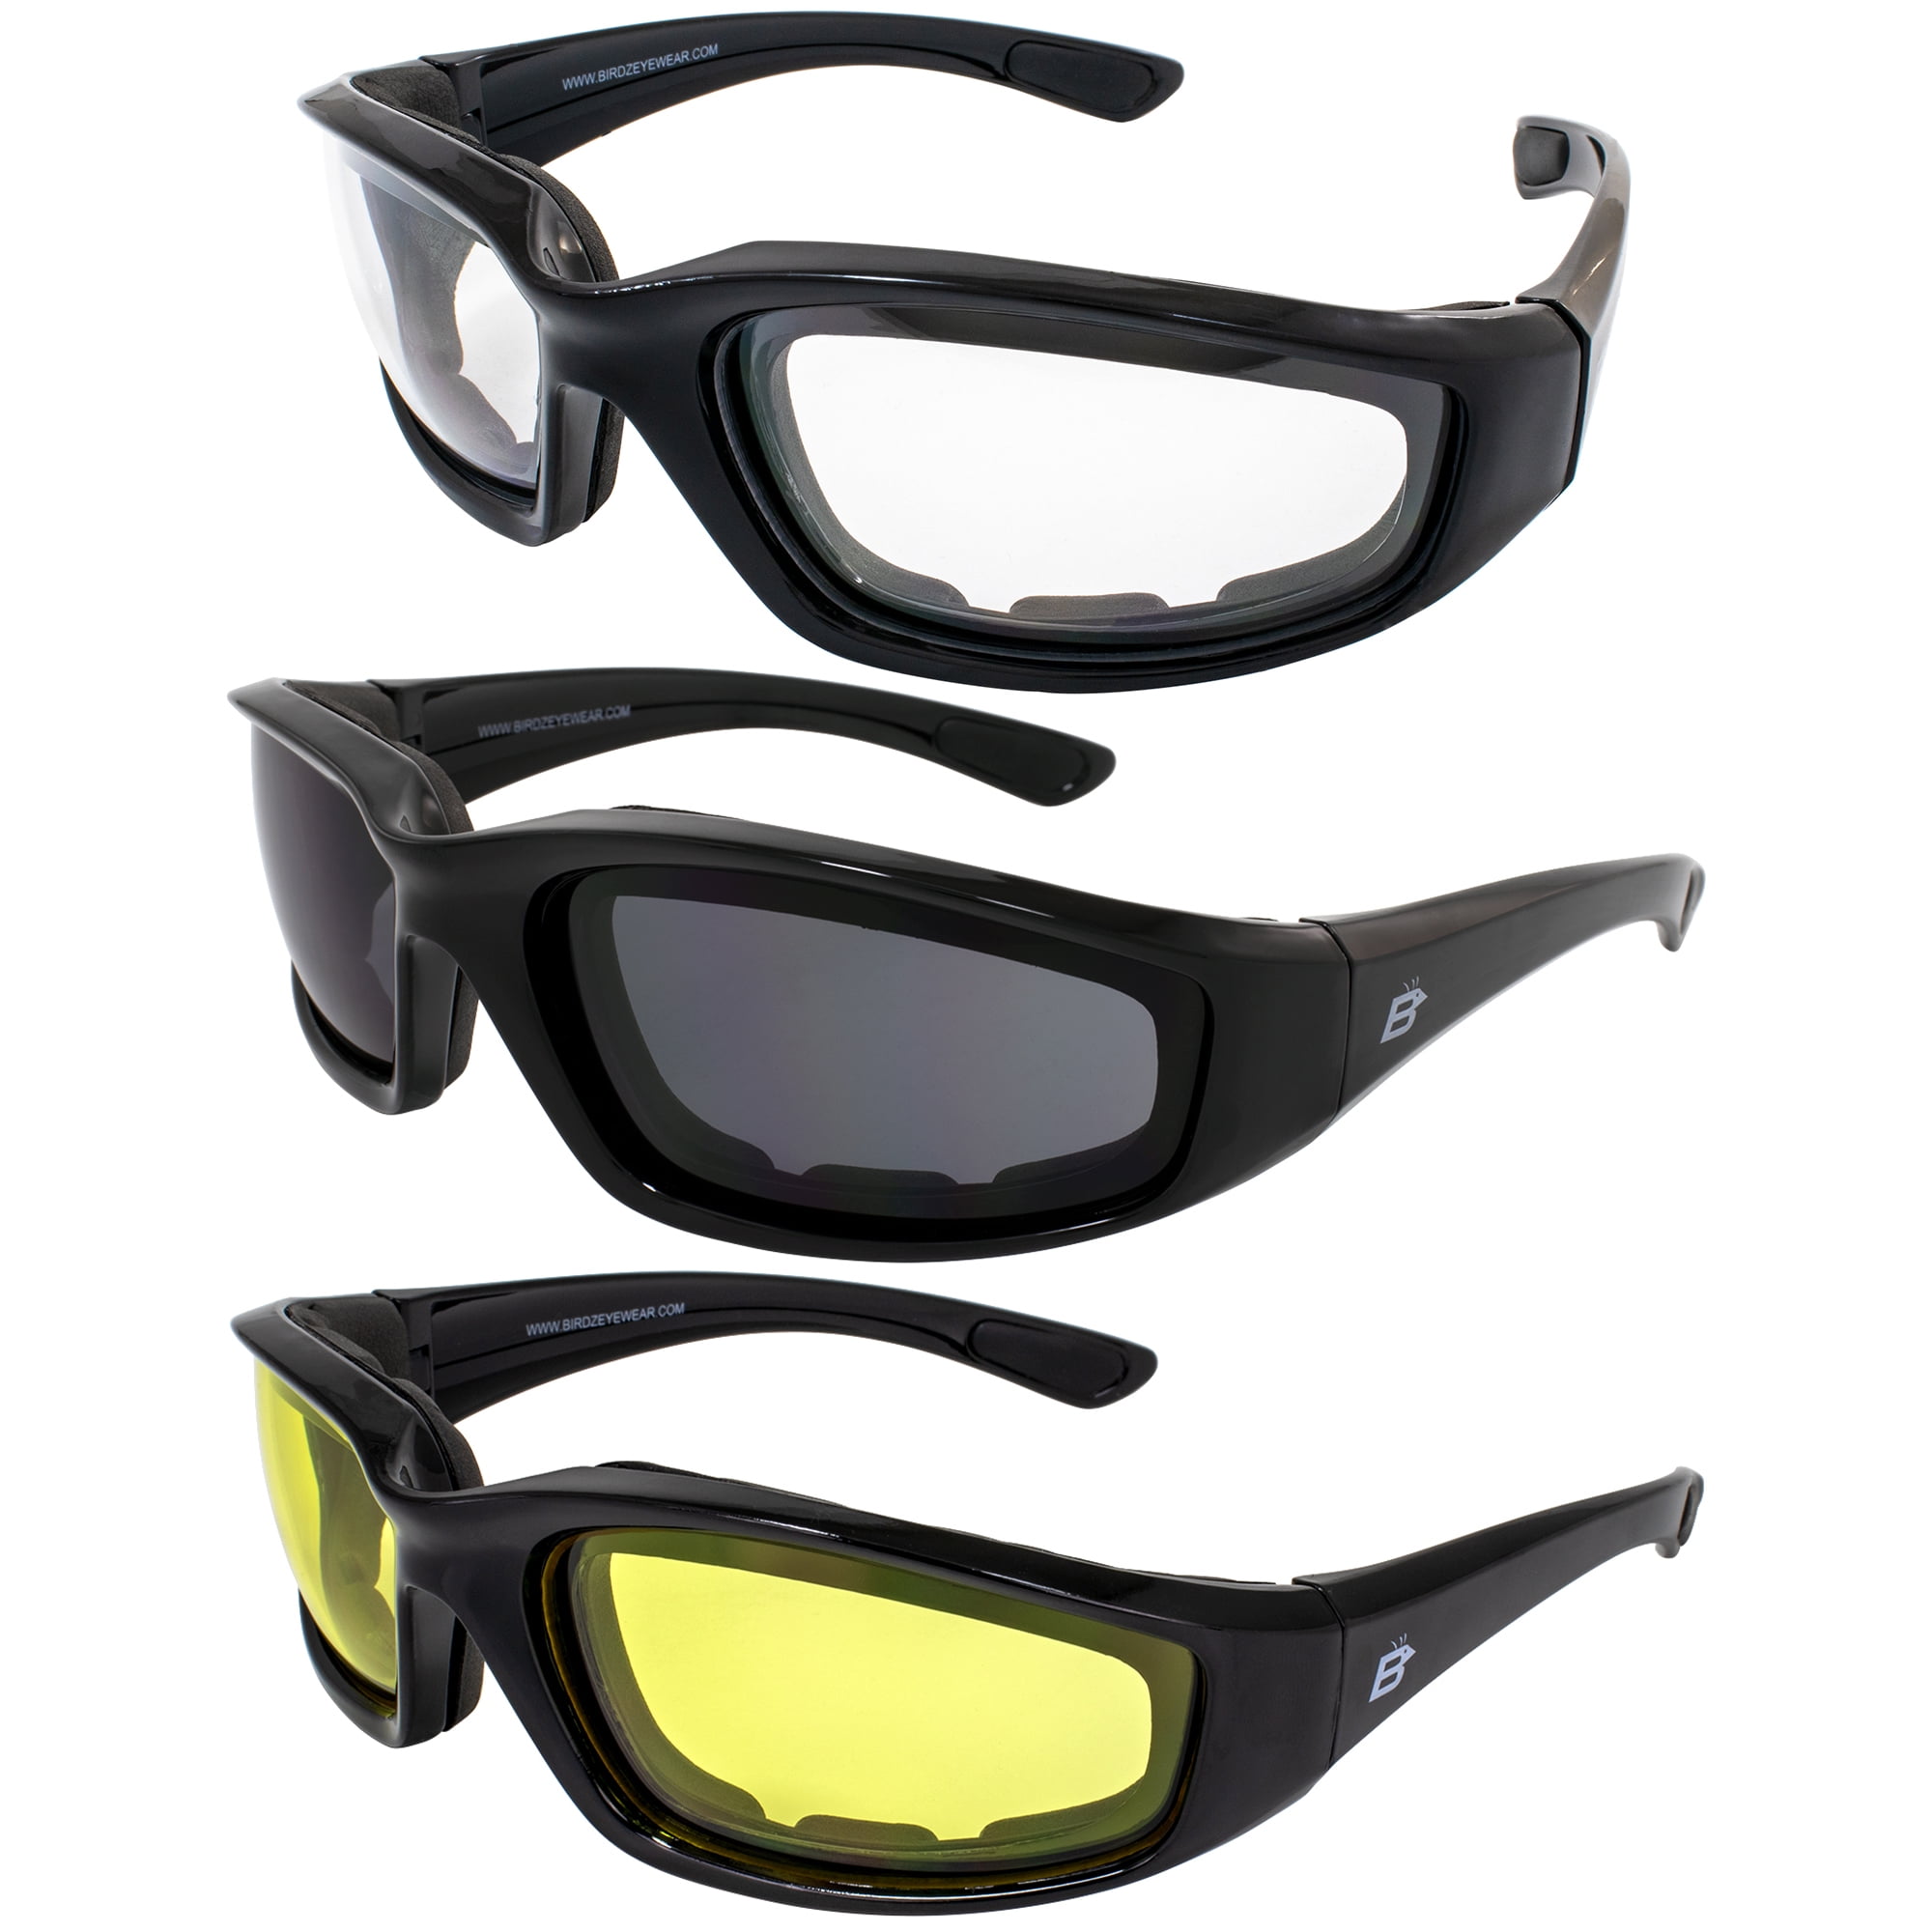 Wind Resistant Sunglasses Extreme Sports Motorcycle Riding Outdoor Sun Glasses 